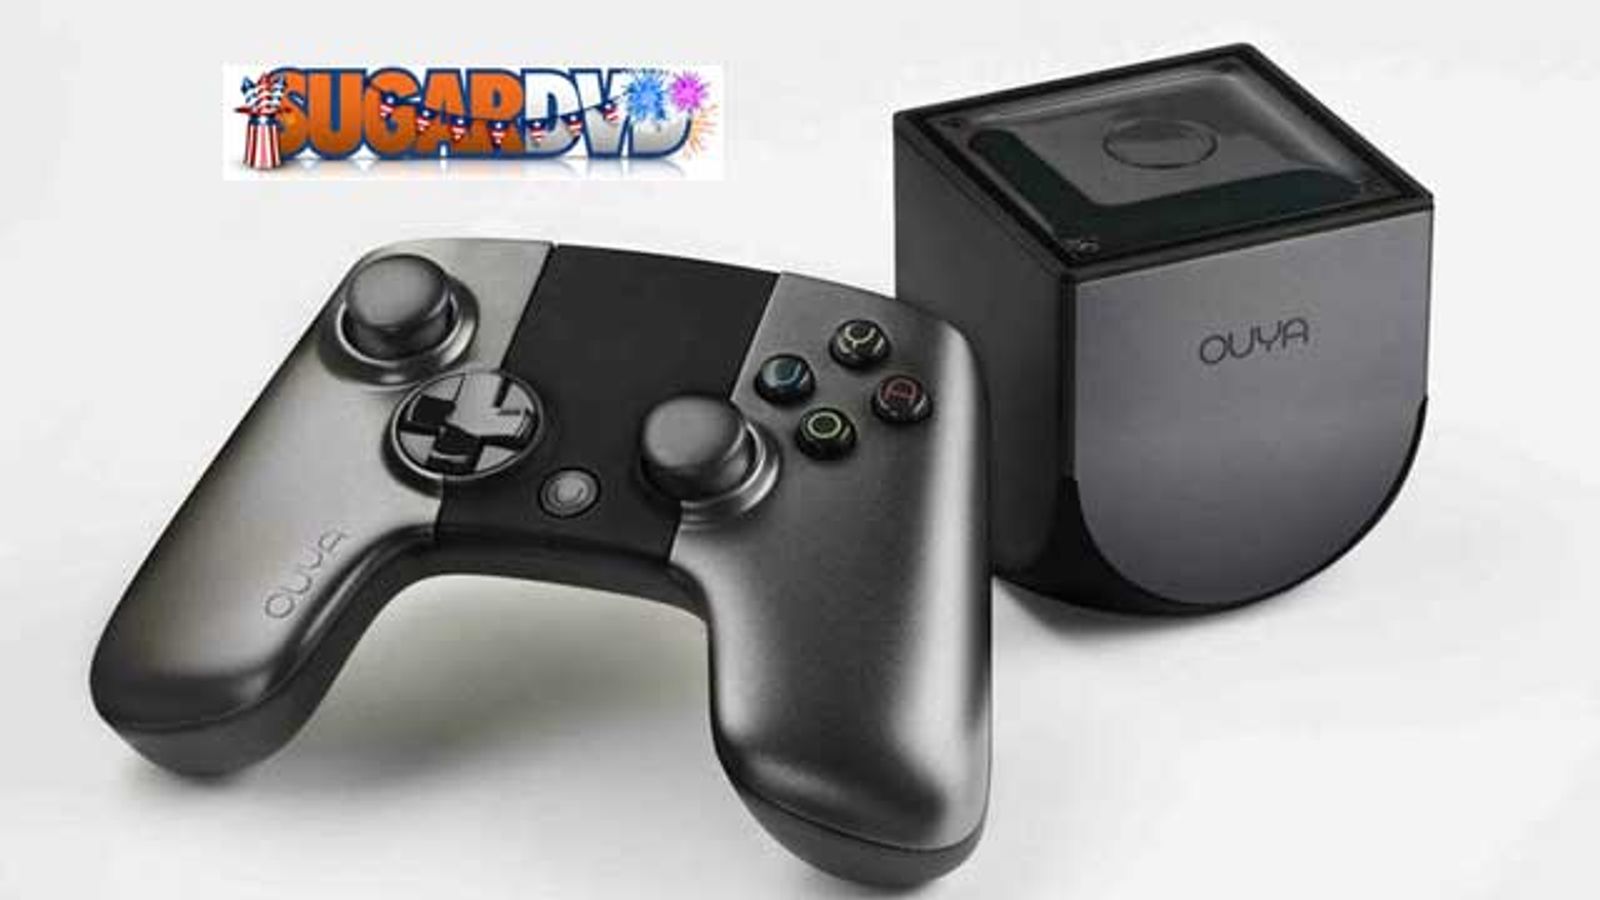 SugarDVD Now Available on New Ouya Game Console